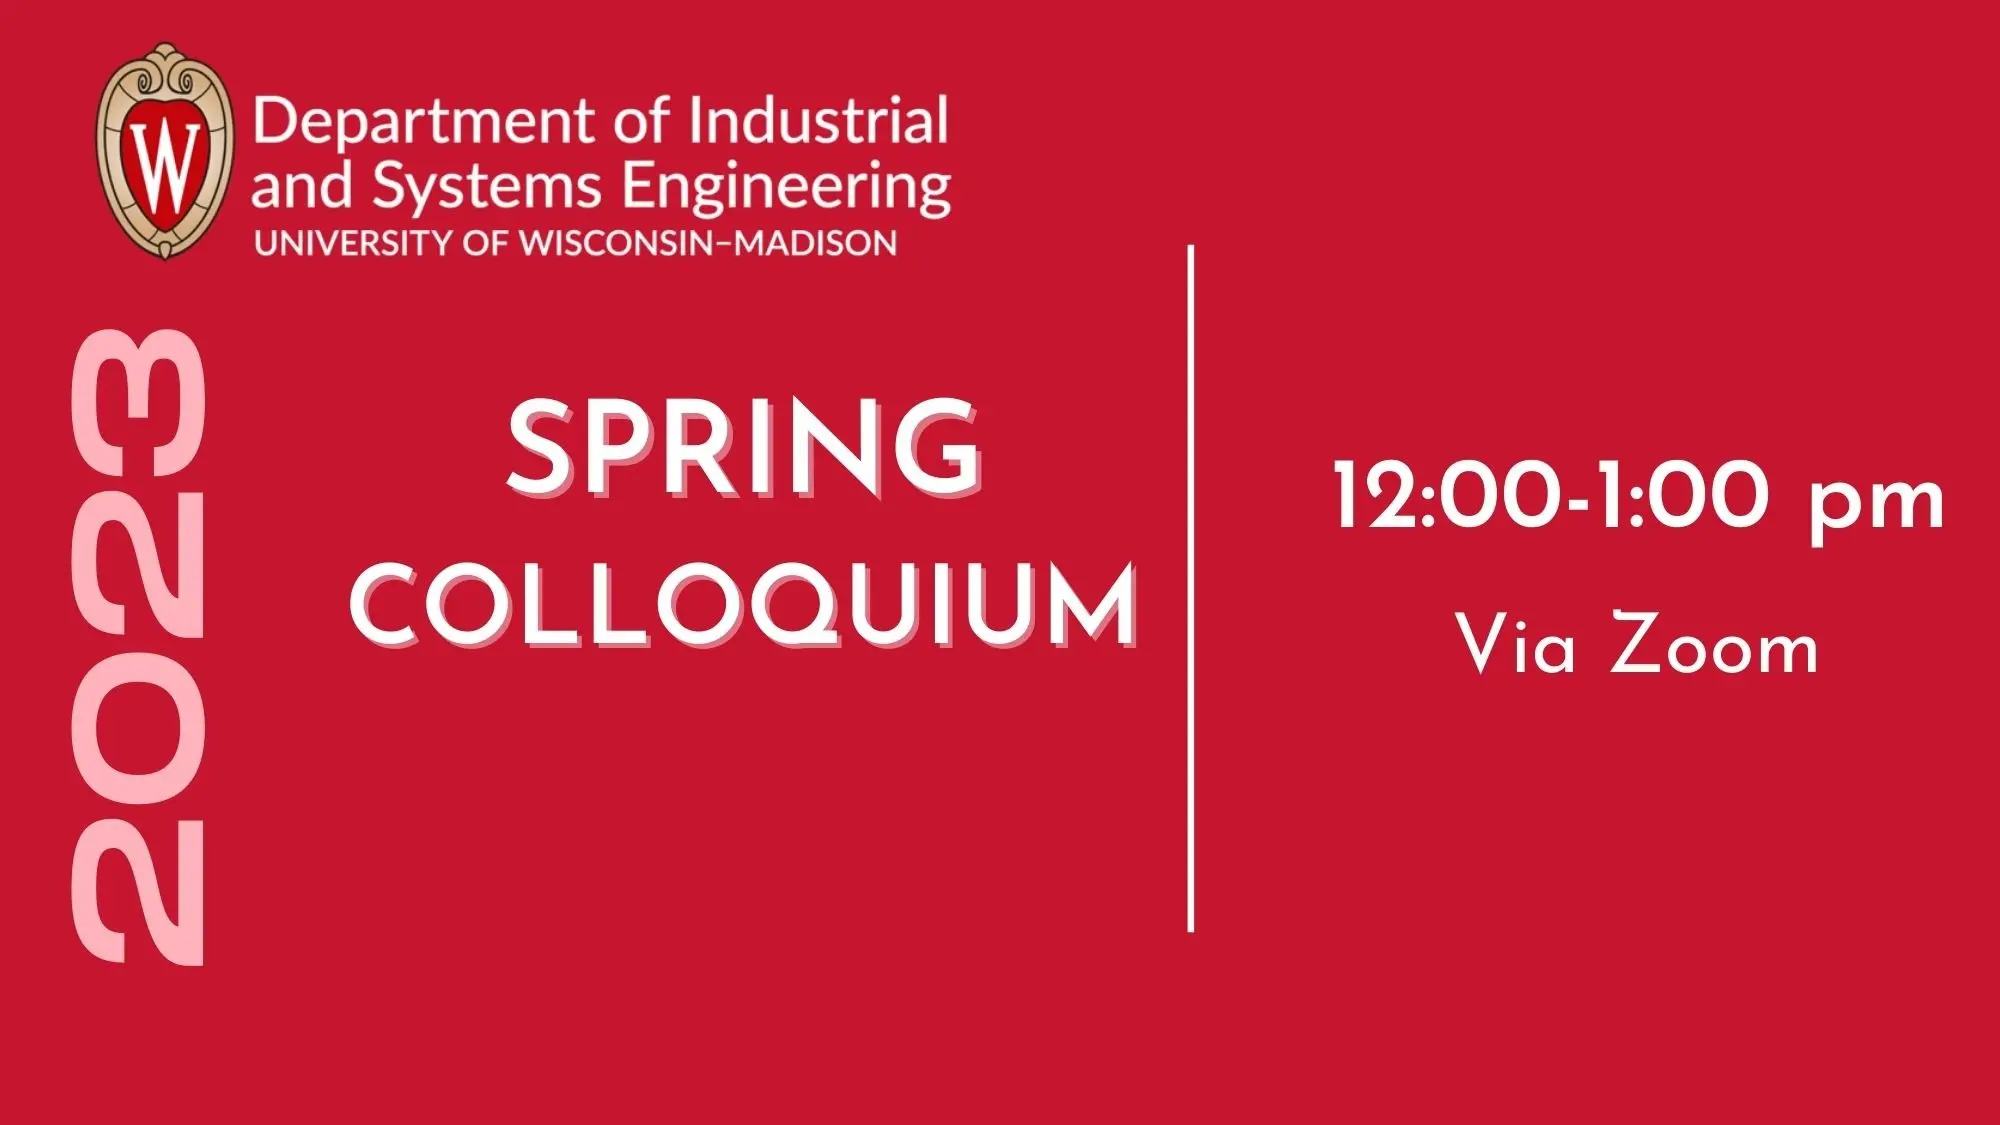 spring 2023 colloquium for uw-department of industrial and systems engineering from 12:00 pm to 1:00 pm